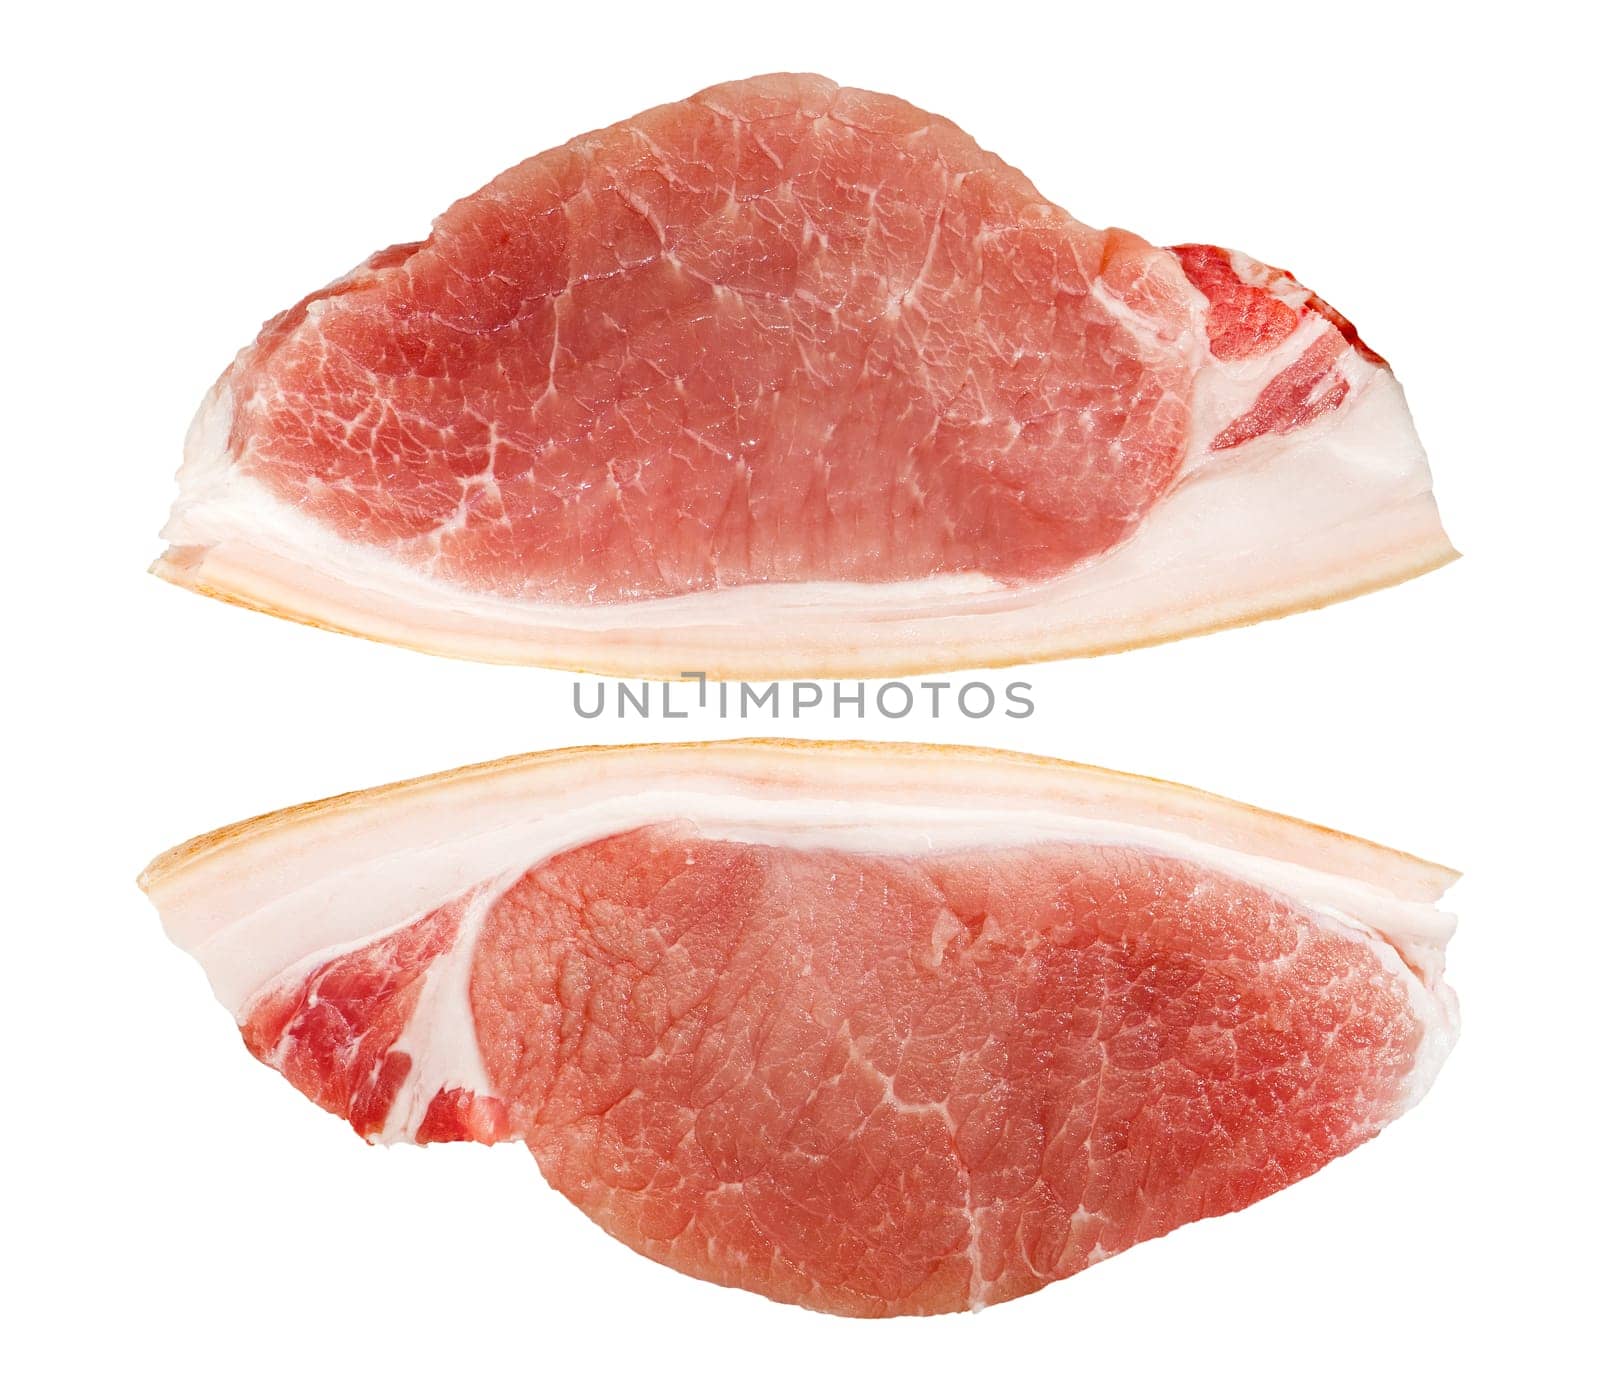 Pieces of raw pork. Two pieces of fresh pork meat isolated on a white background. Isolate slices of pork for inserting into a design, project, for an advertising banner or for a packaging label